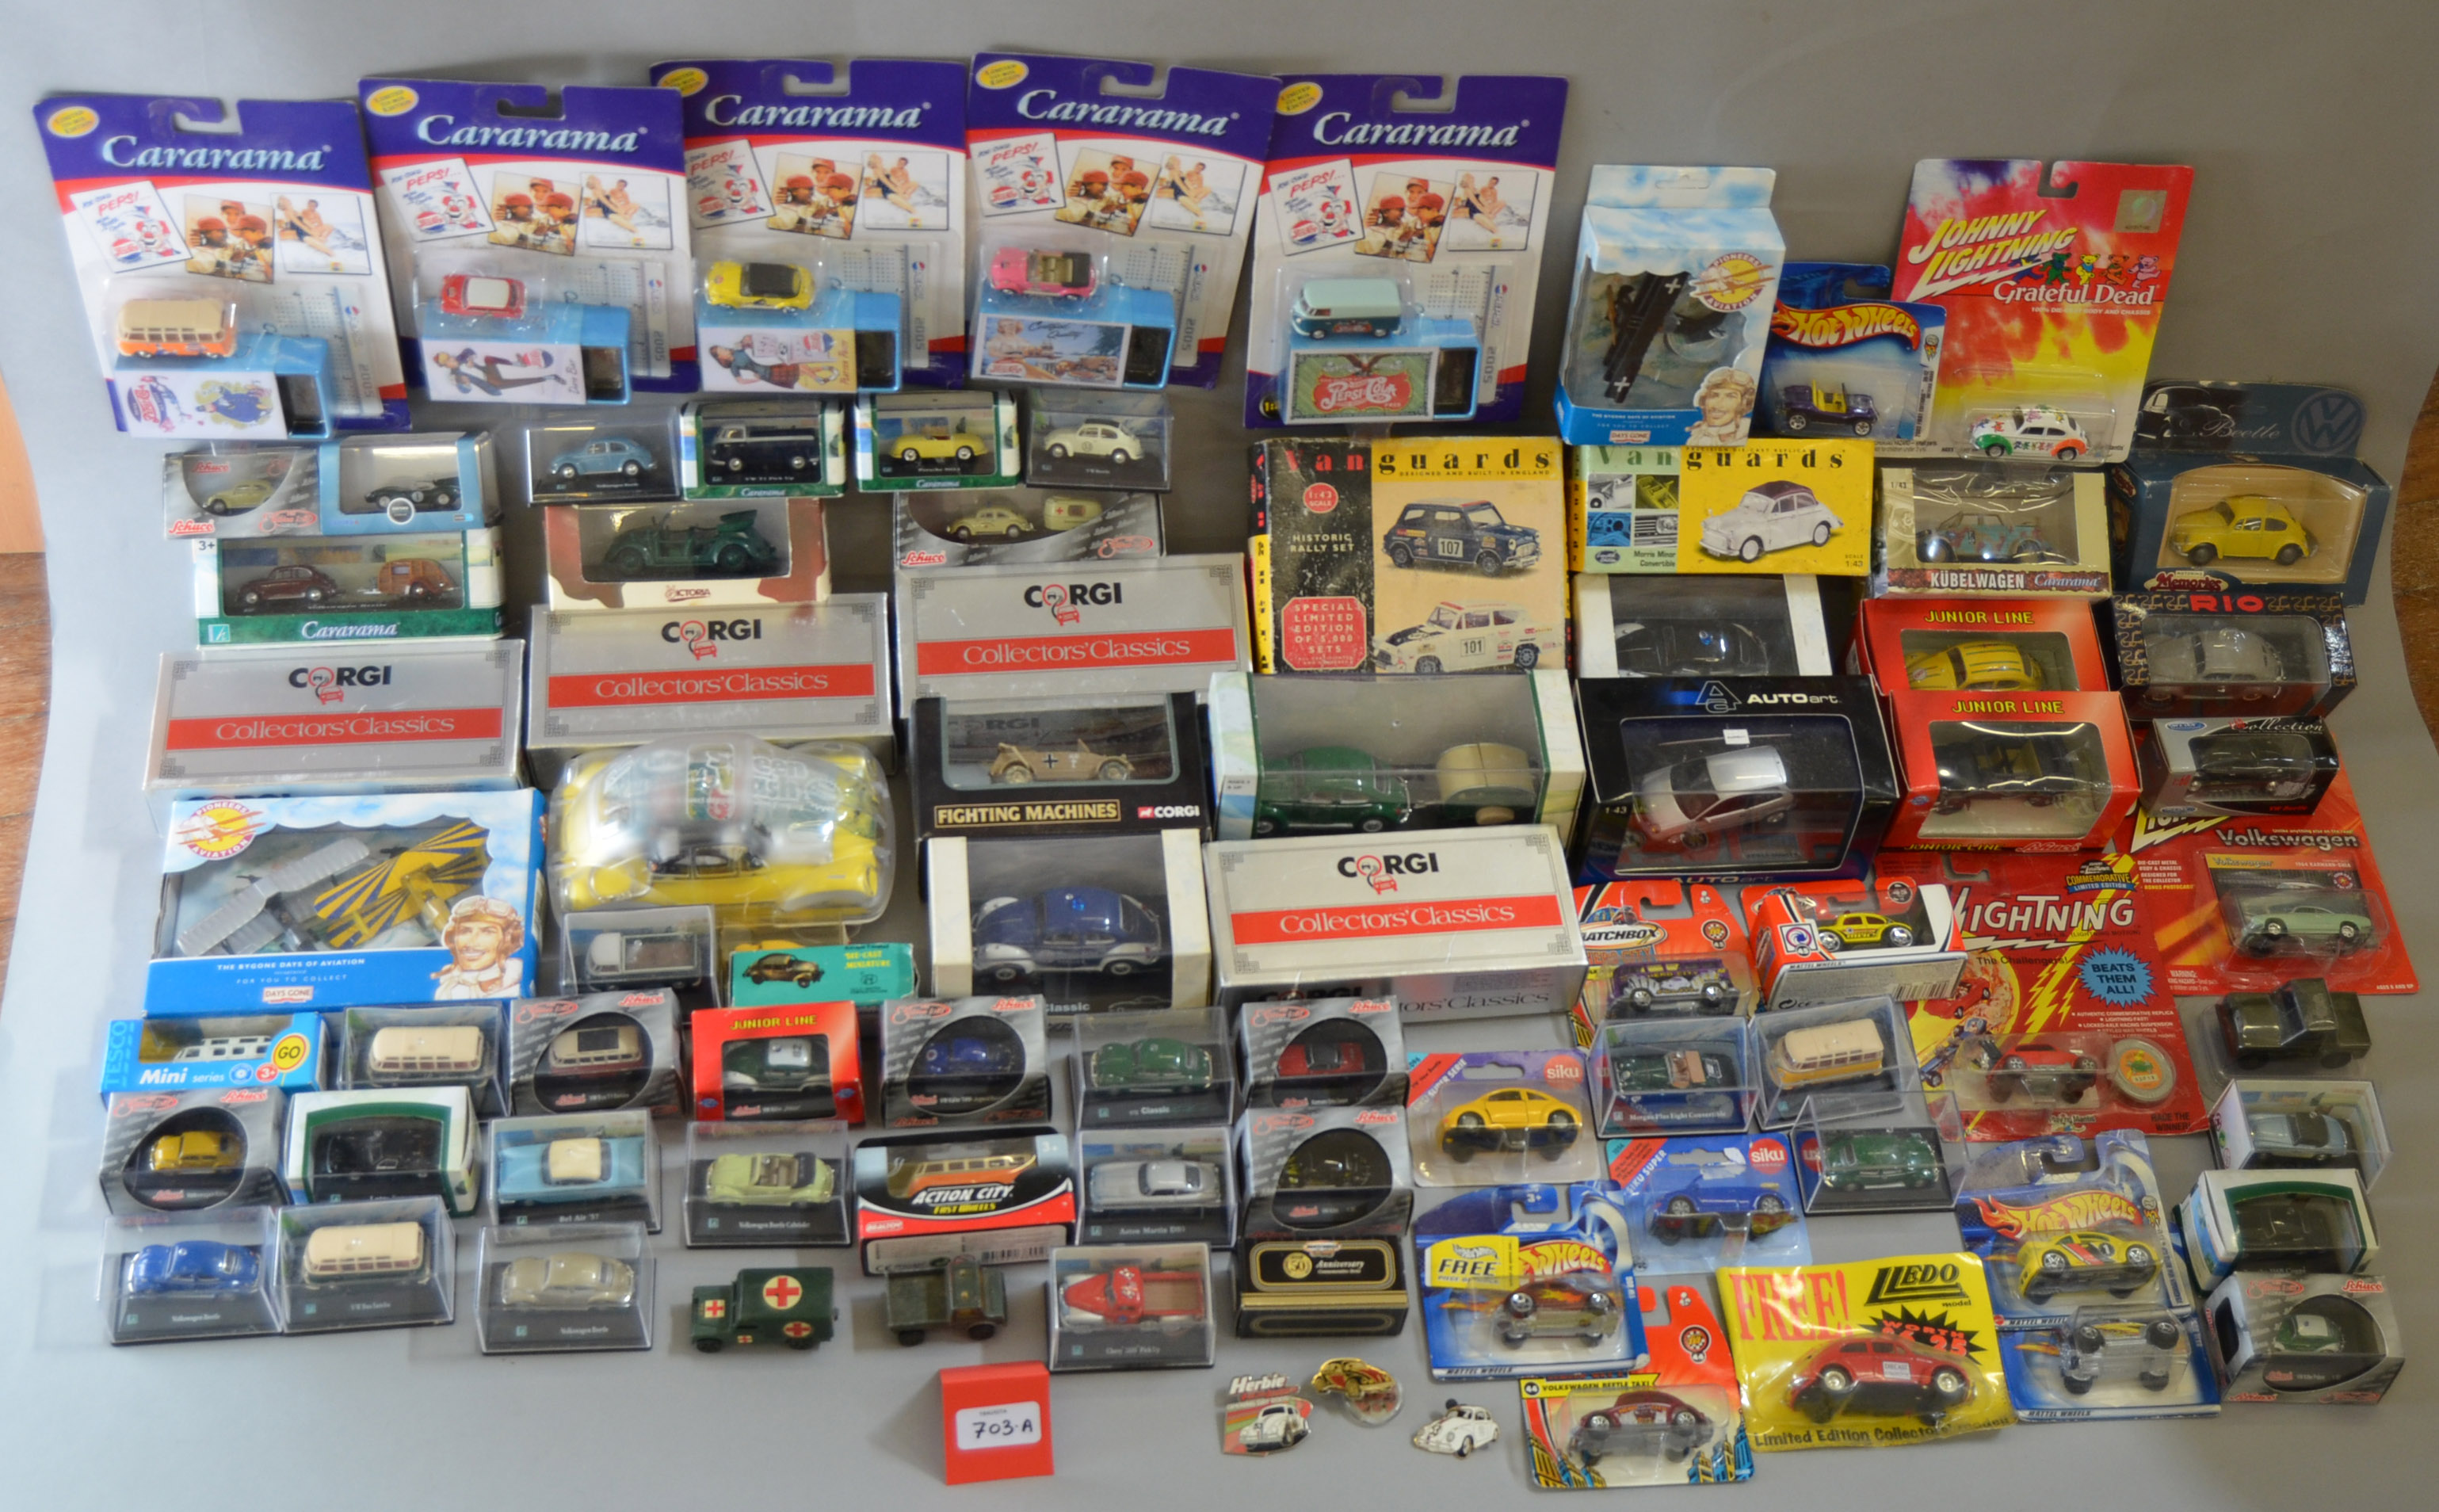 A good quantity of boxed and carded diecast models by Cararama, Lledo, Schuco and others,